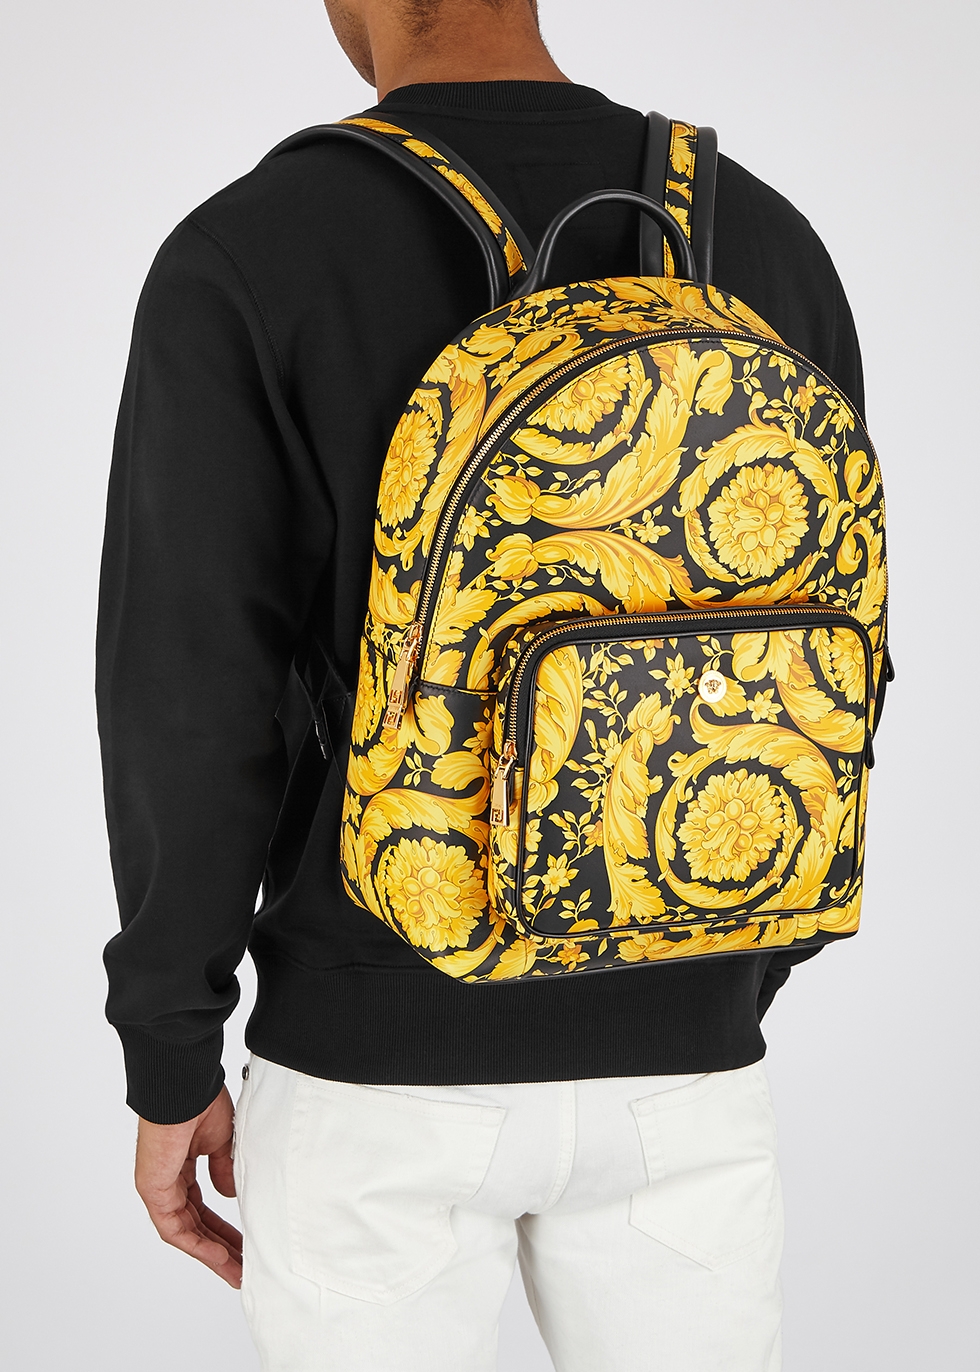 Versace Black Leather Backpack Online Deals, UP TO 58% OFF | www 